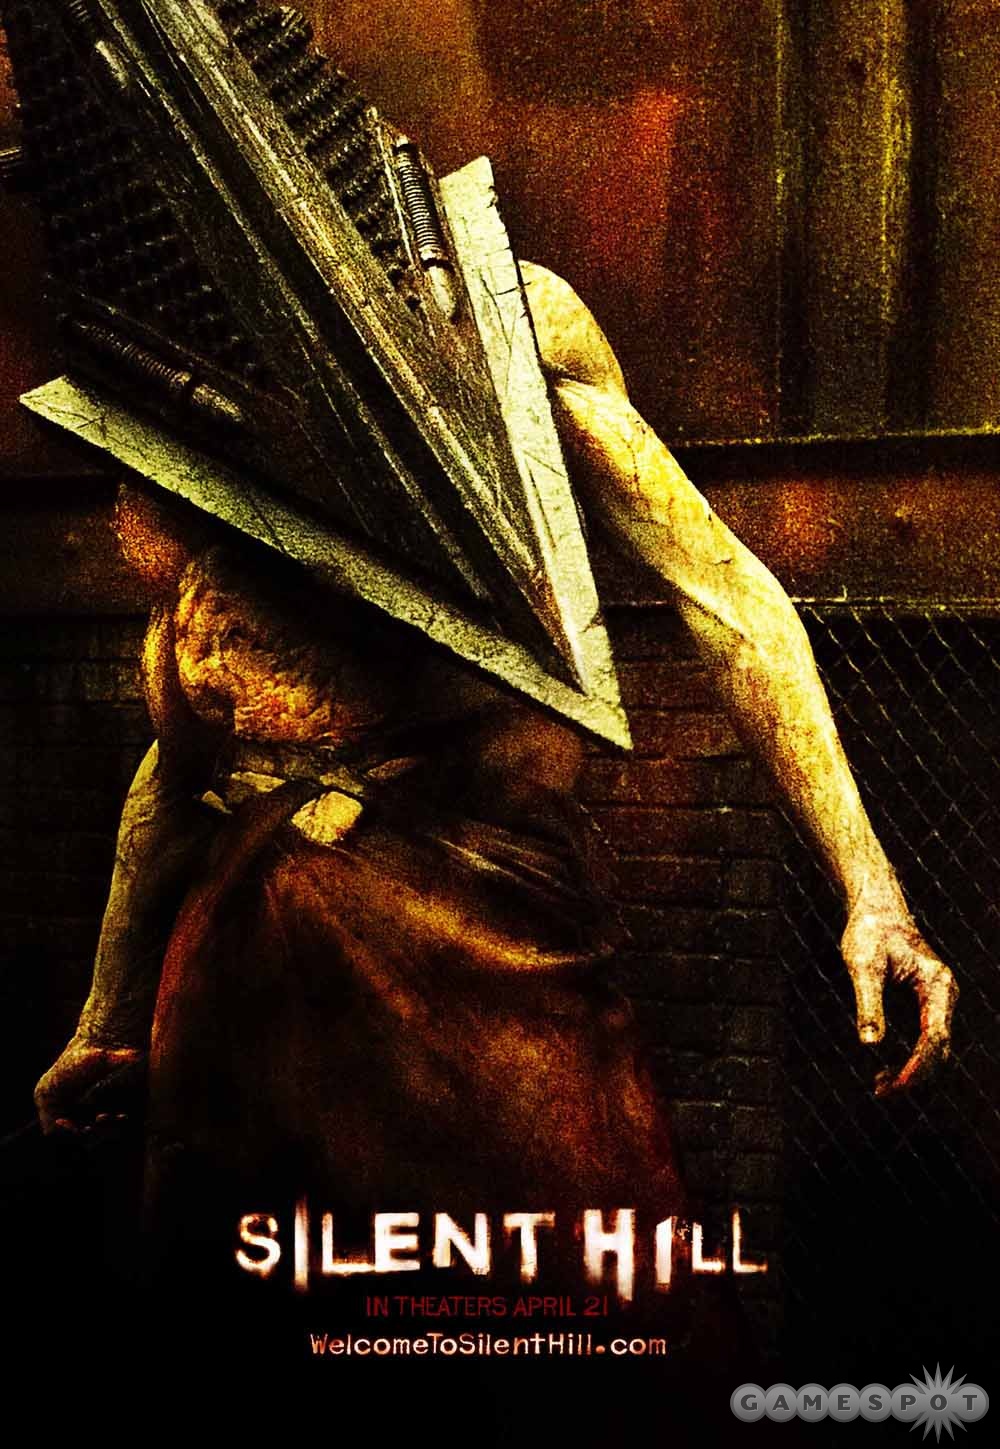   Both Mr. Yamaoka and our favorite parts of the movie revolve around the character Pyramid Head.